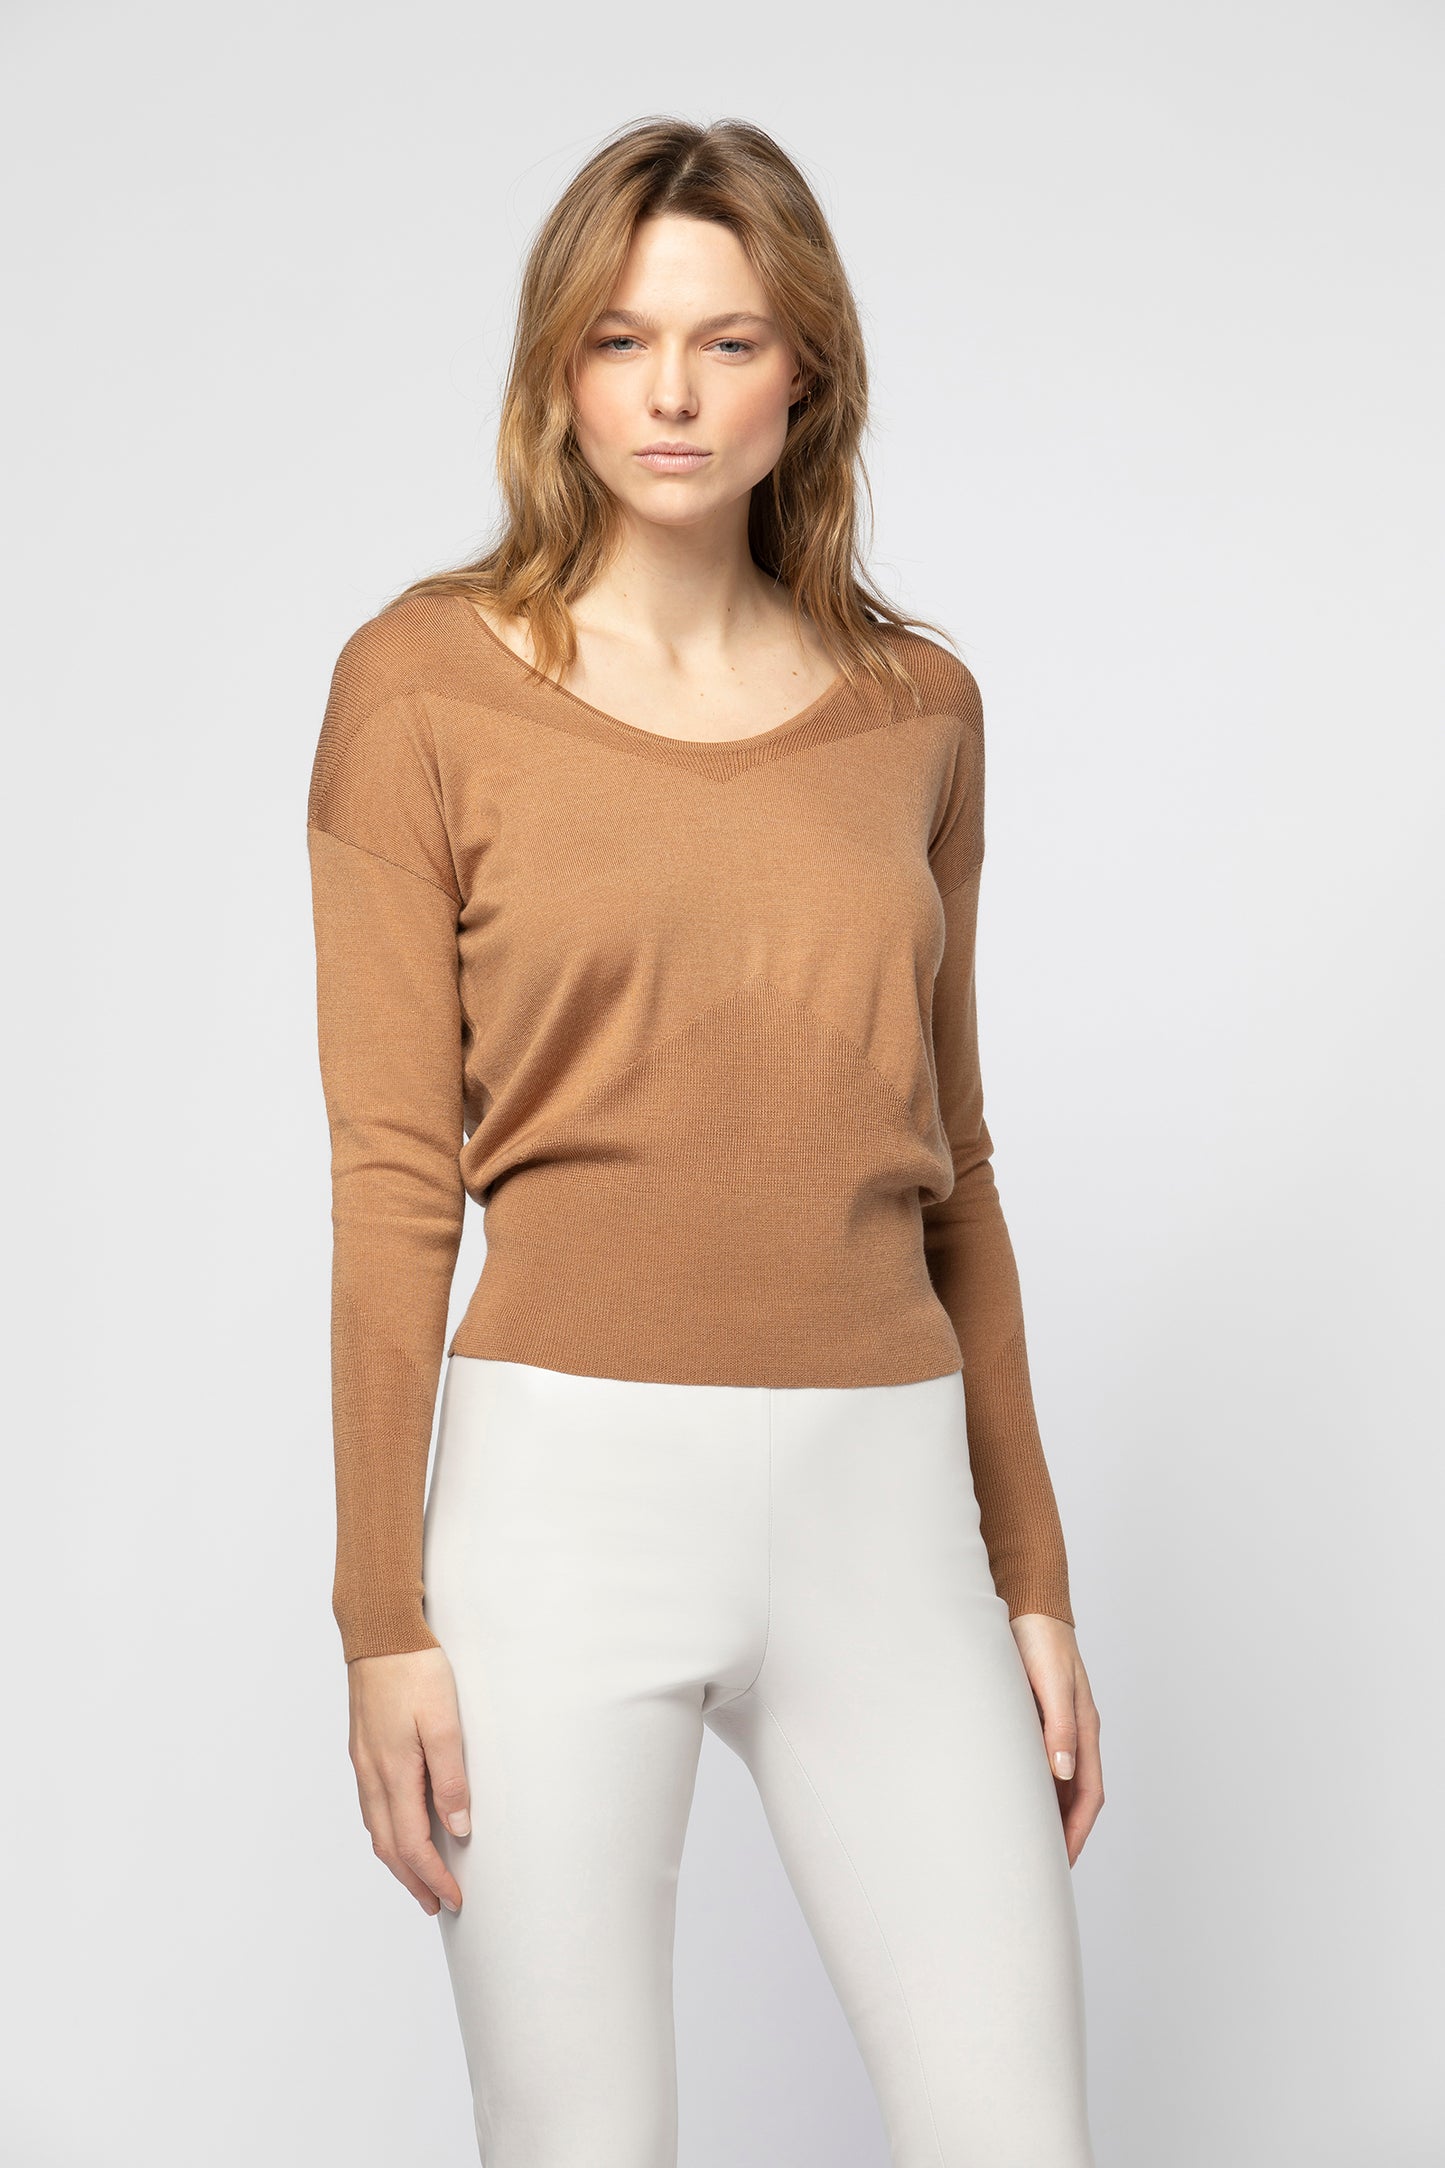 PAVELY sweater